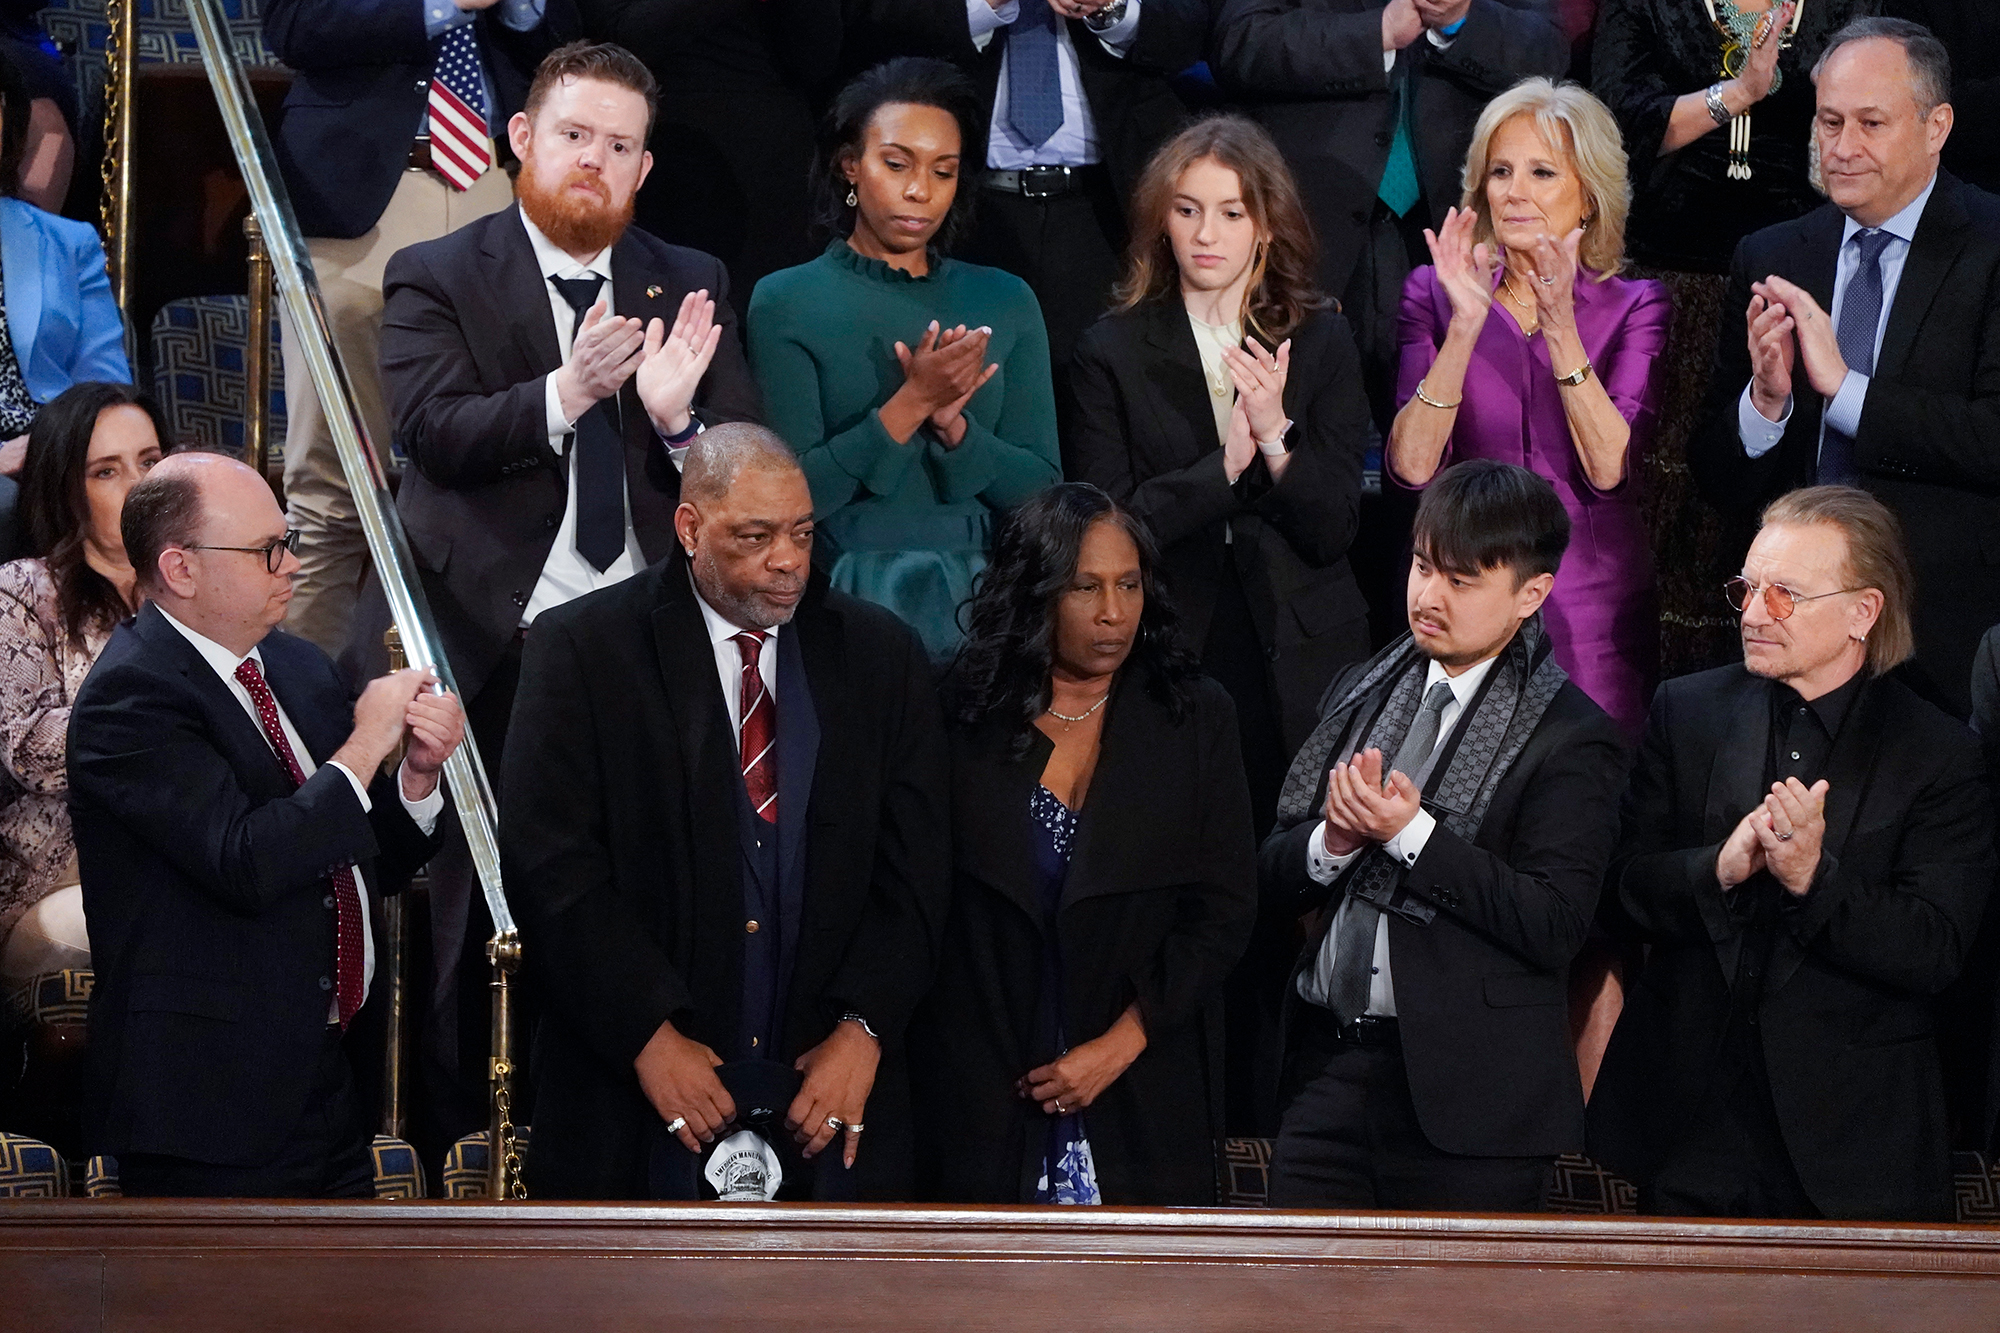 RowVaughn Wells, center, mother of Tyre Nichols, who died after being beaten by Memphis police officers, and her husband Rodney Wells, second left, are recognized by President Joe Biden as he delivers his State of the Union speech.